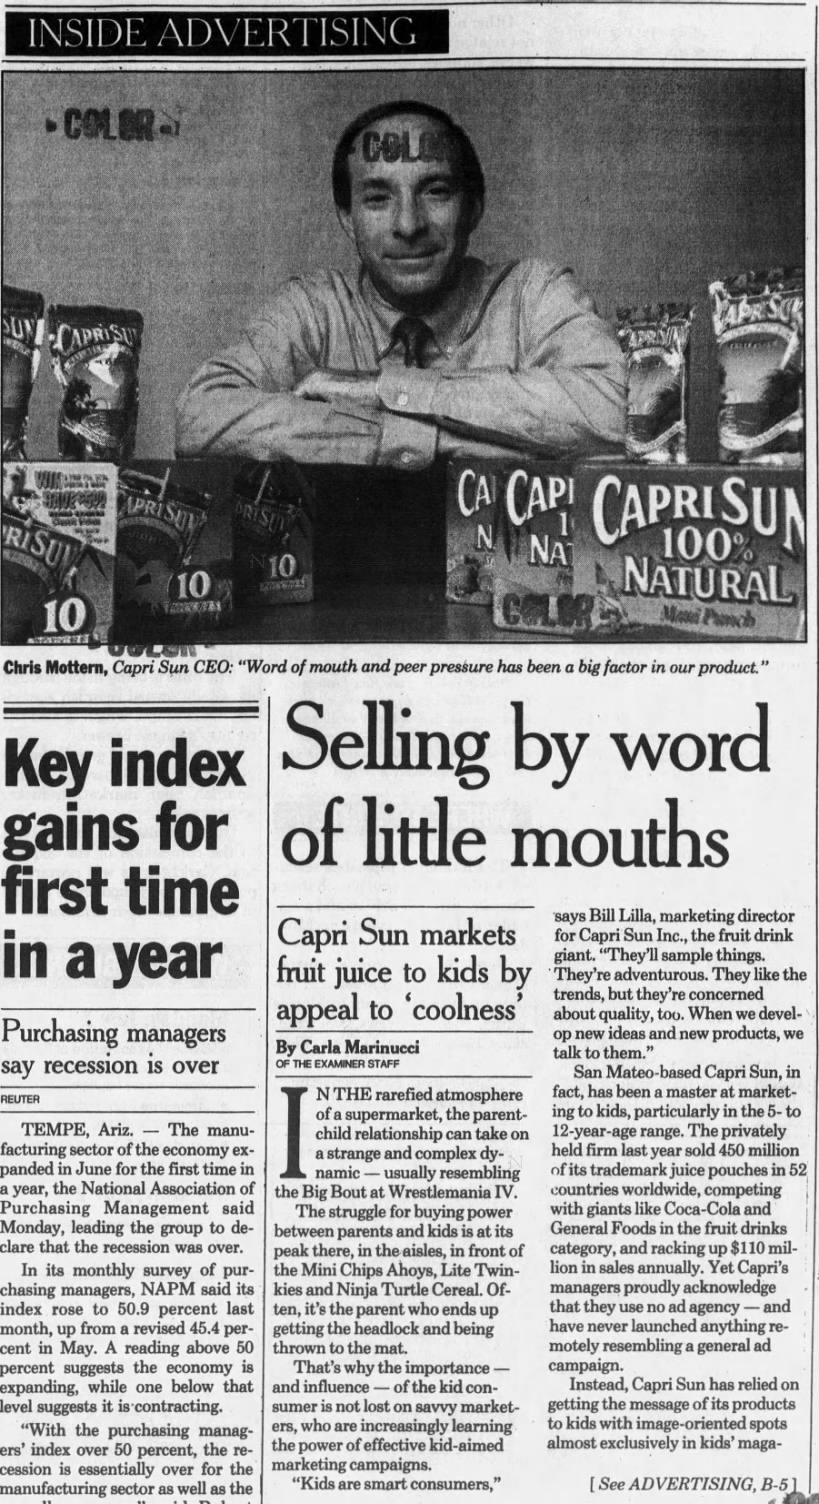 Selling by word of little mouths. Next: https://www.newspapers.com/clip/117709528/